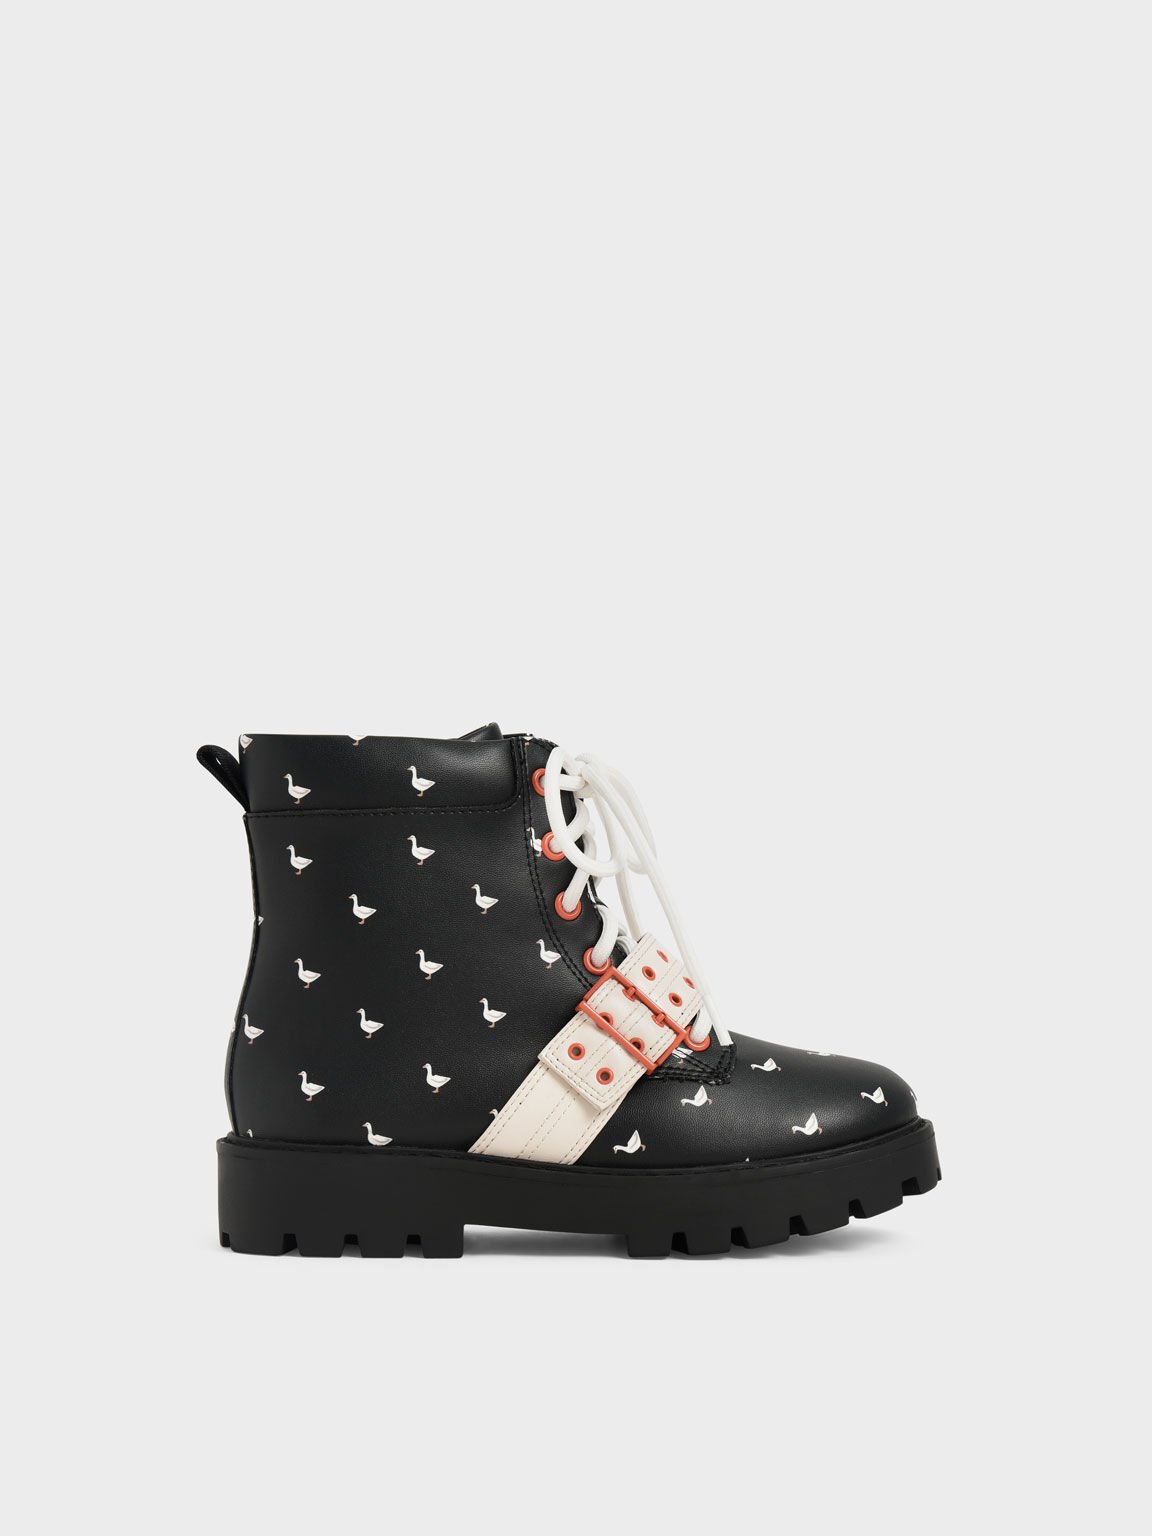 Girls' Printed Lace-Up Ankle Boots, Black Textured, hi-res